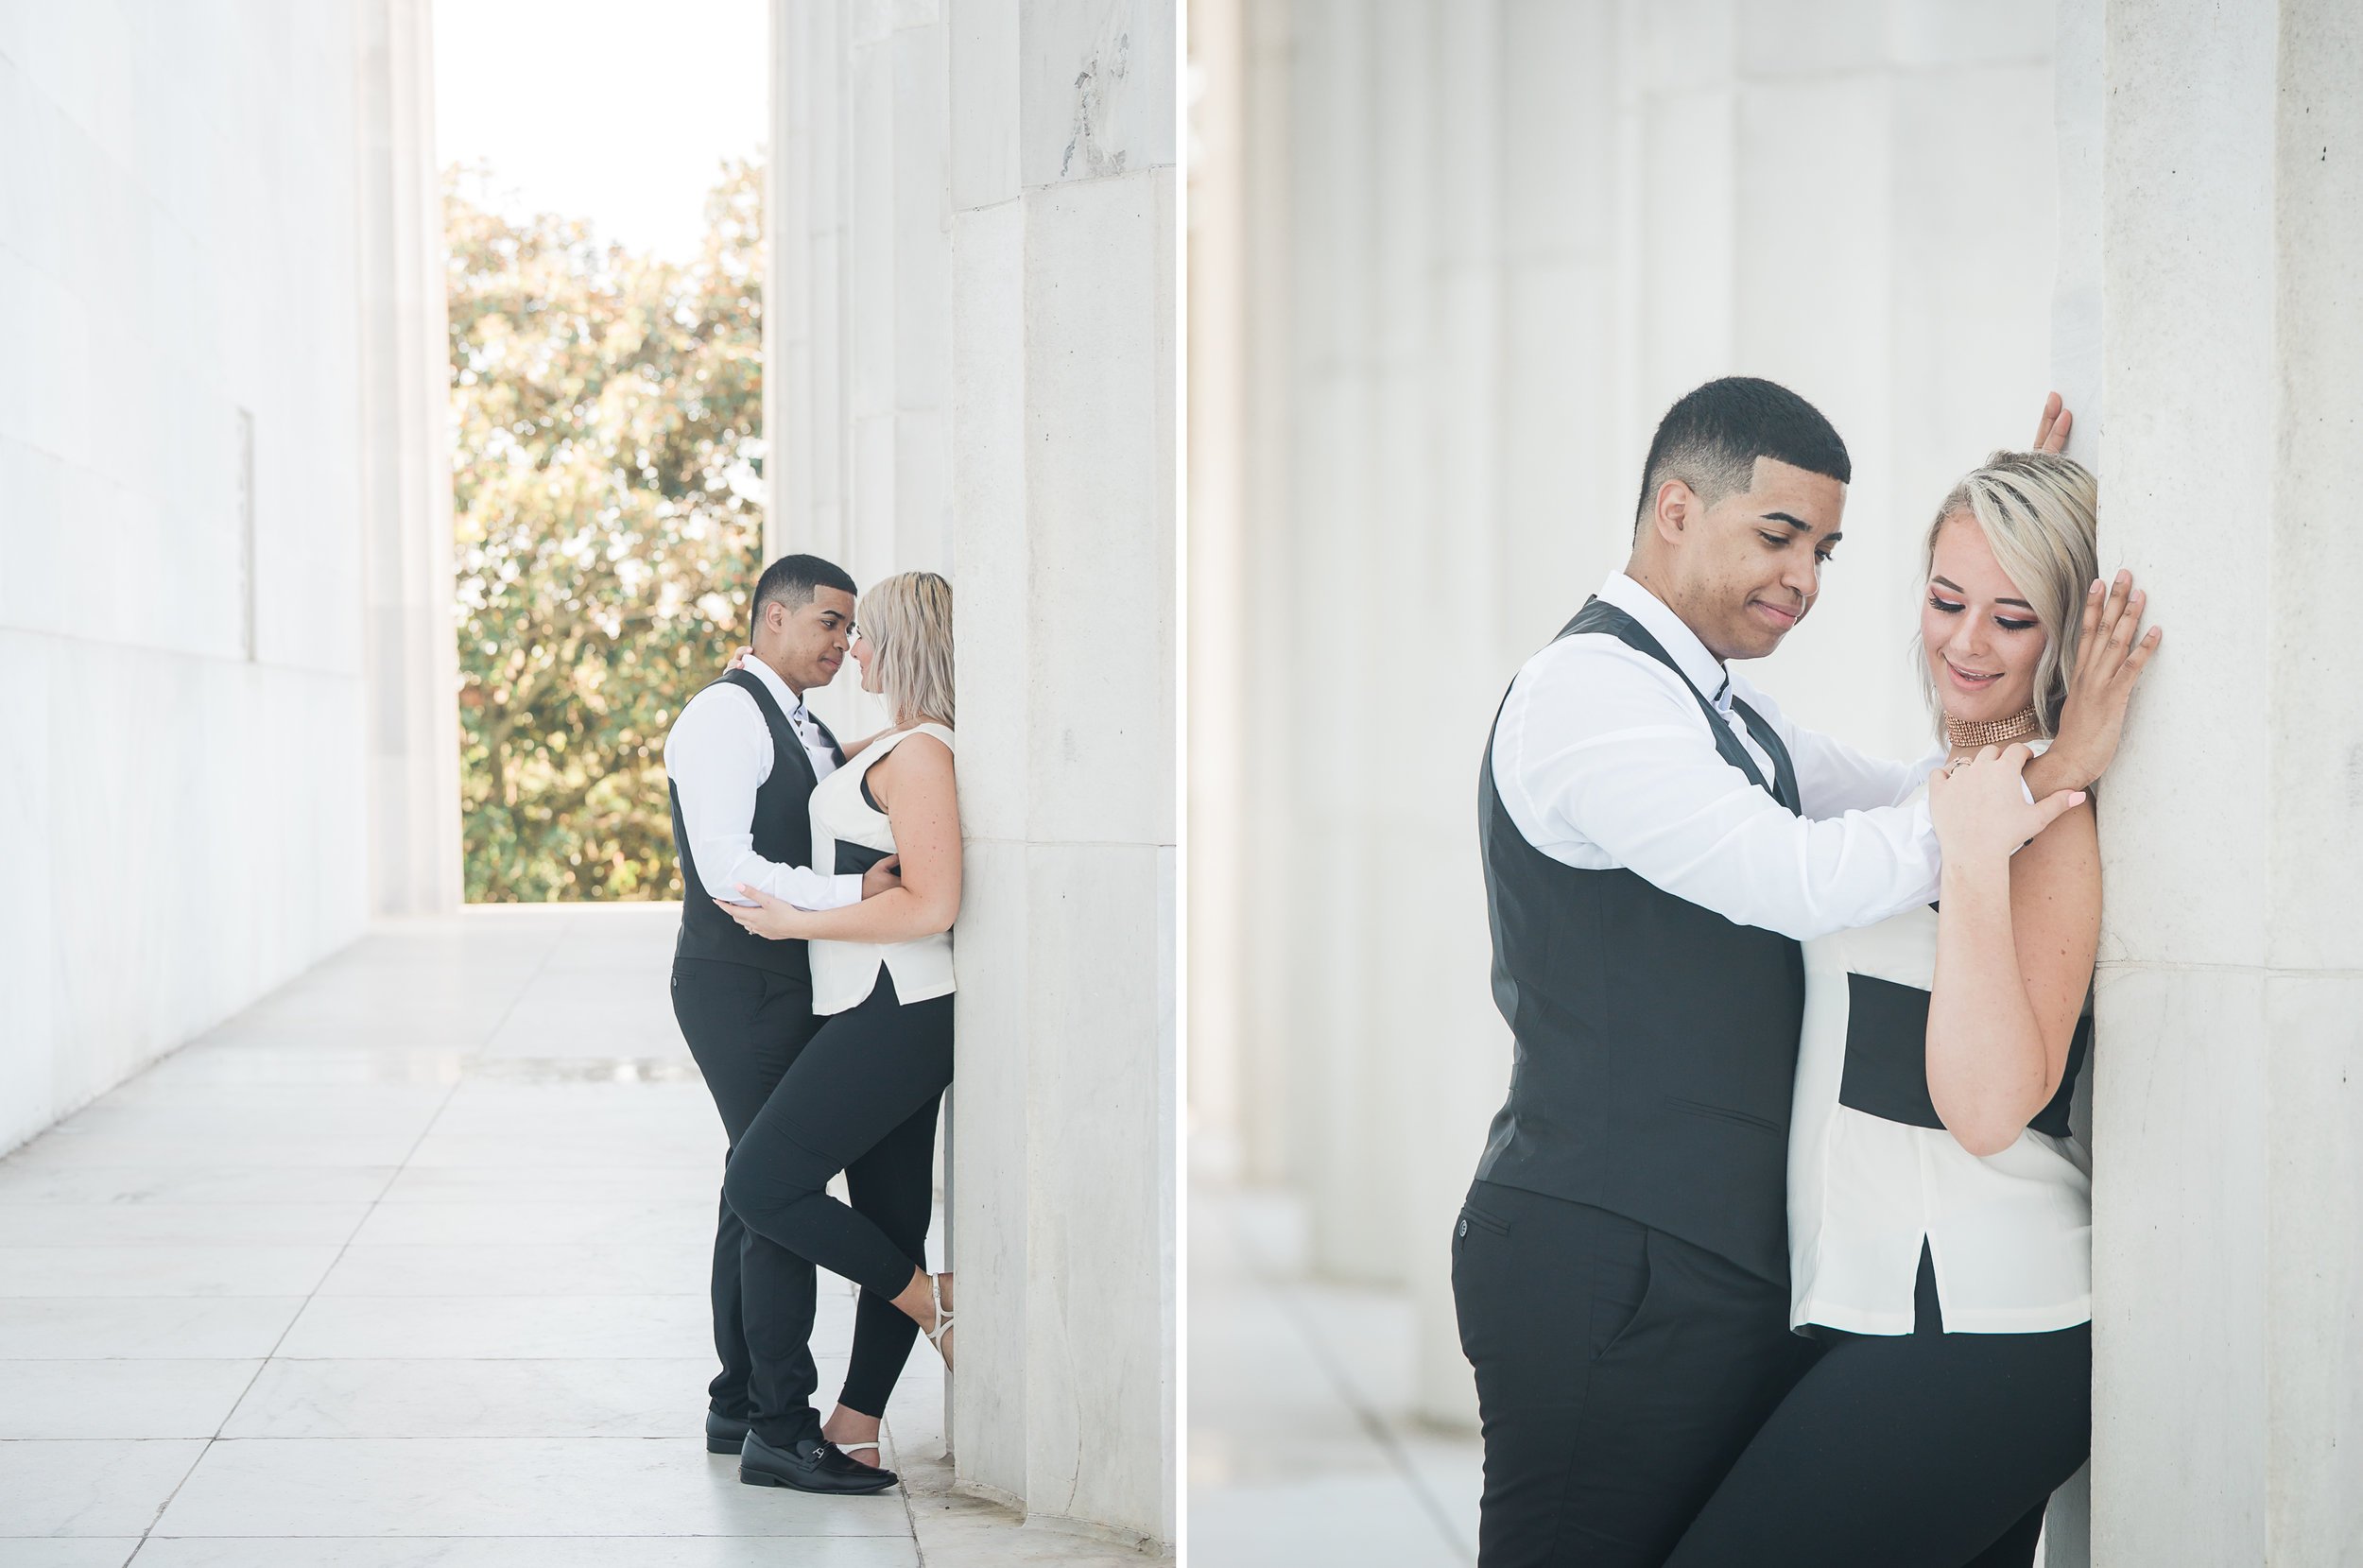 Engagement photography at Lincoln Memorial.